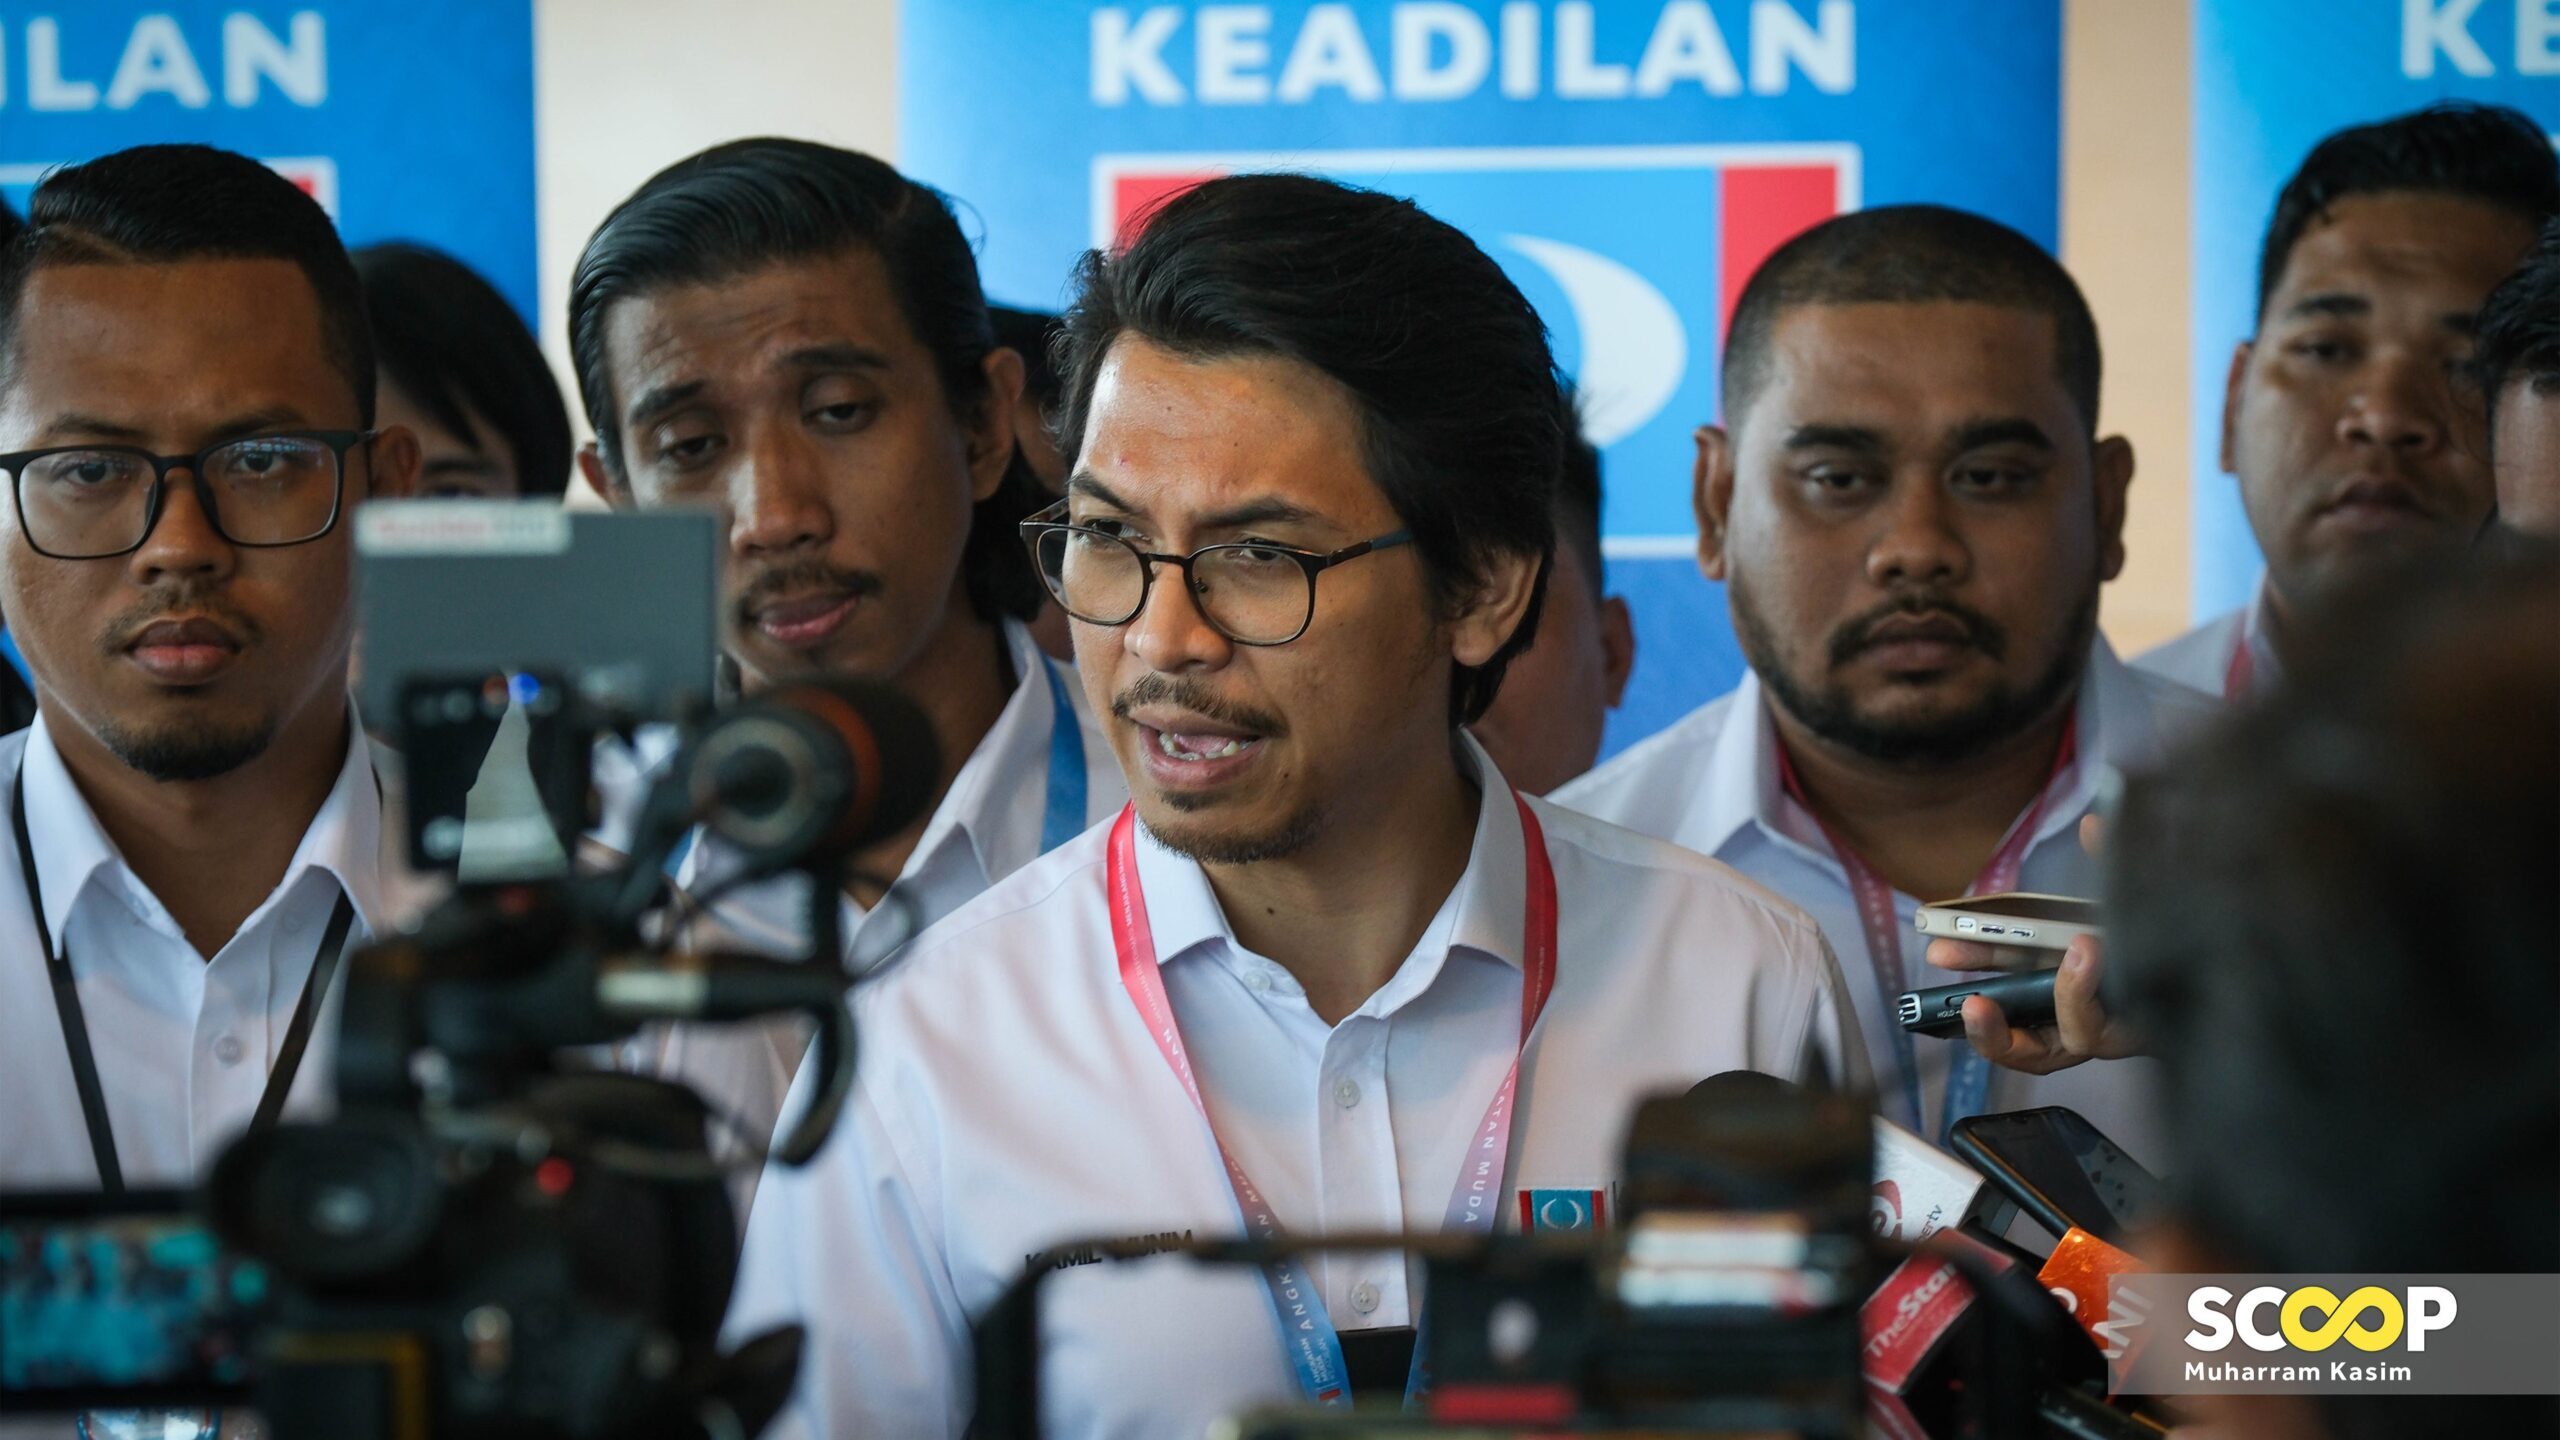 Unity govt has never defended parties collaborating with Israel, says Anwar’s pol-sec